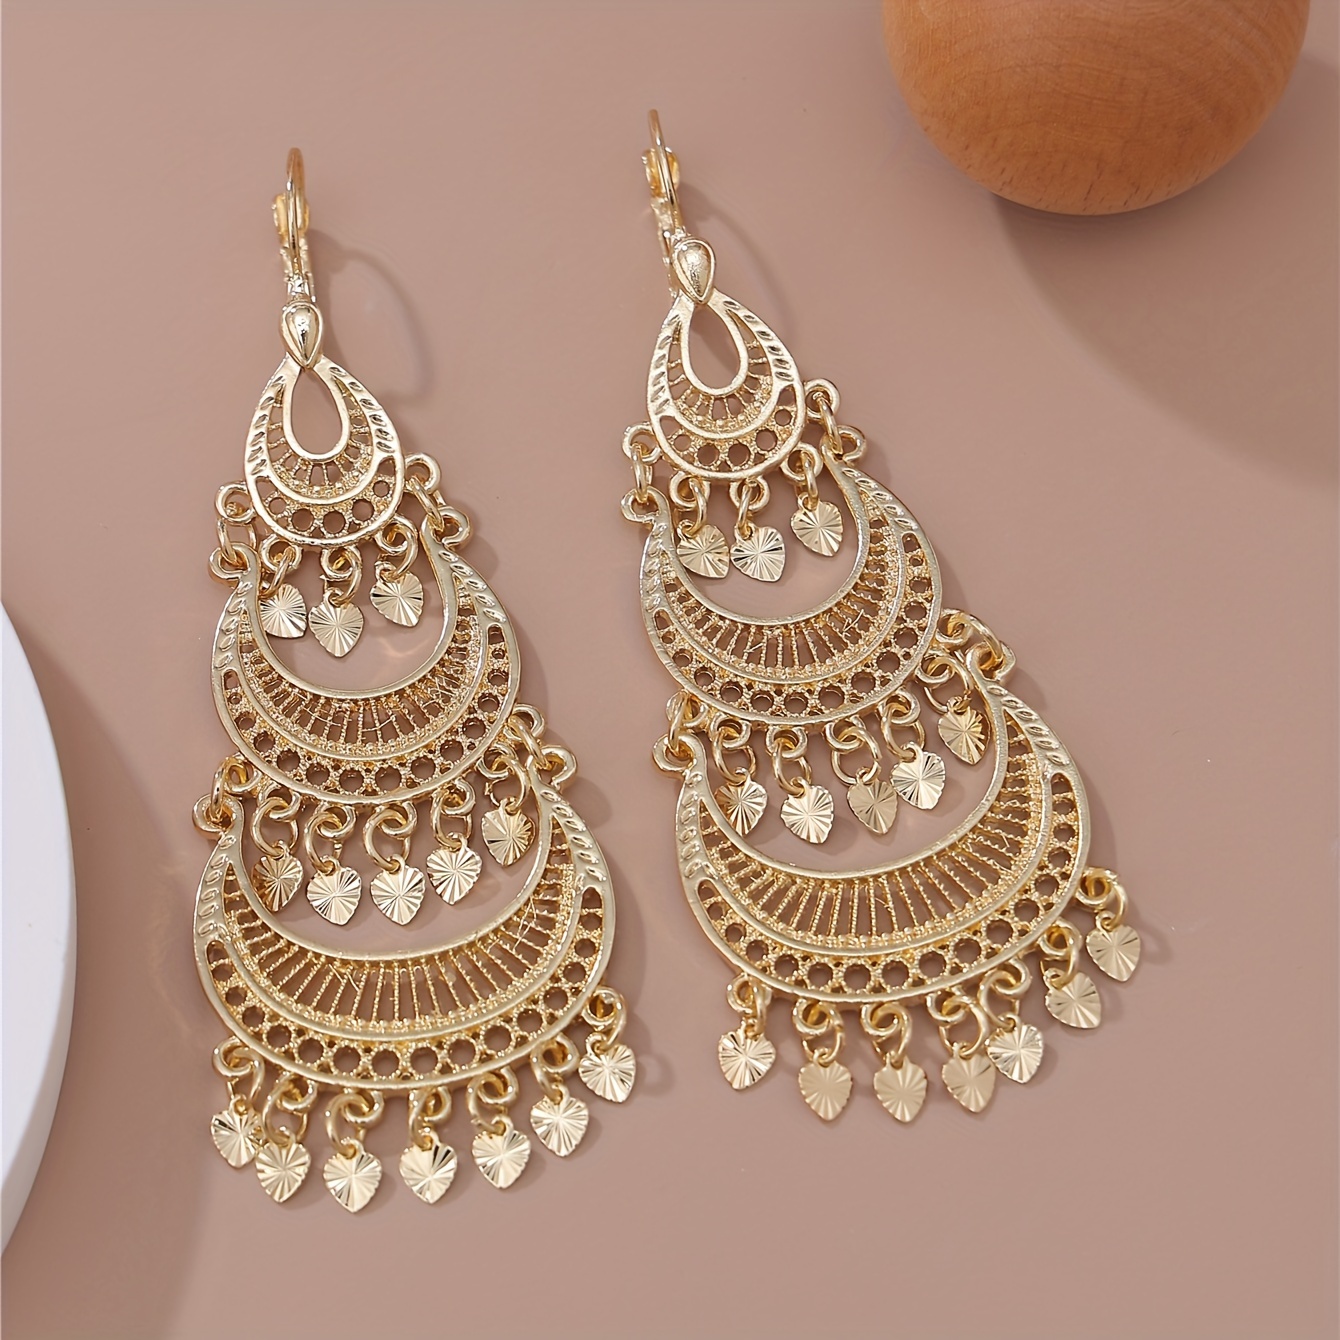 

Arabia Fashion Dangle Earrings 22k Gold Plated Hollow Moon & Tassel Design Match Daily Outfits Party Accessories Wedding Decor